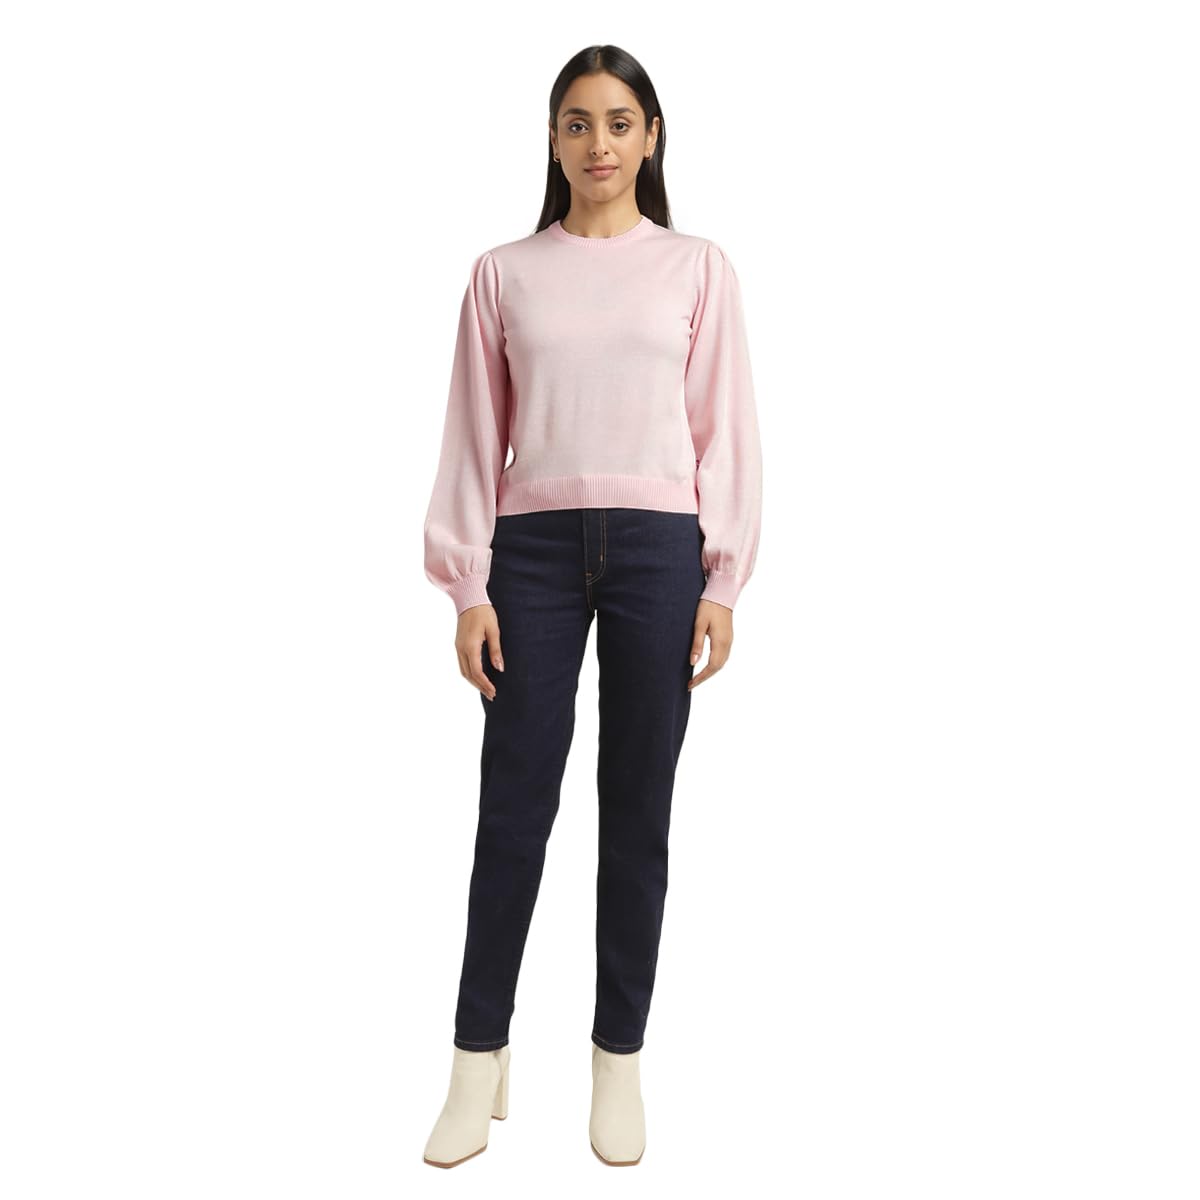 Levi's Women's Cotton Blend Casual Sweater (A3923-0005_Pink